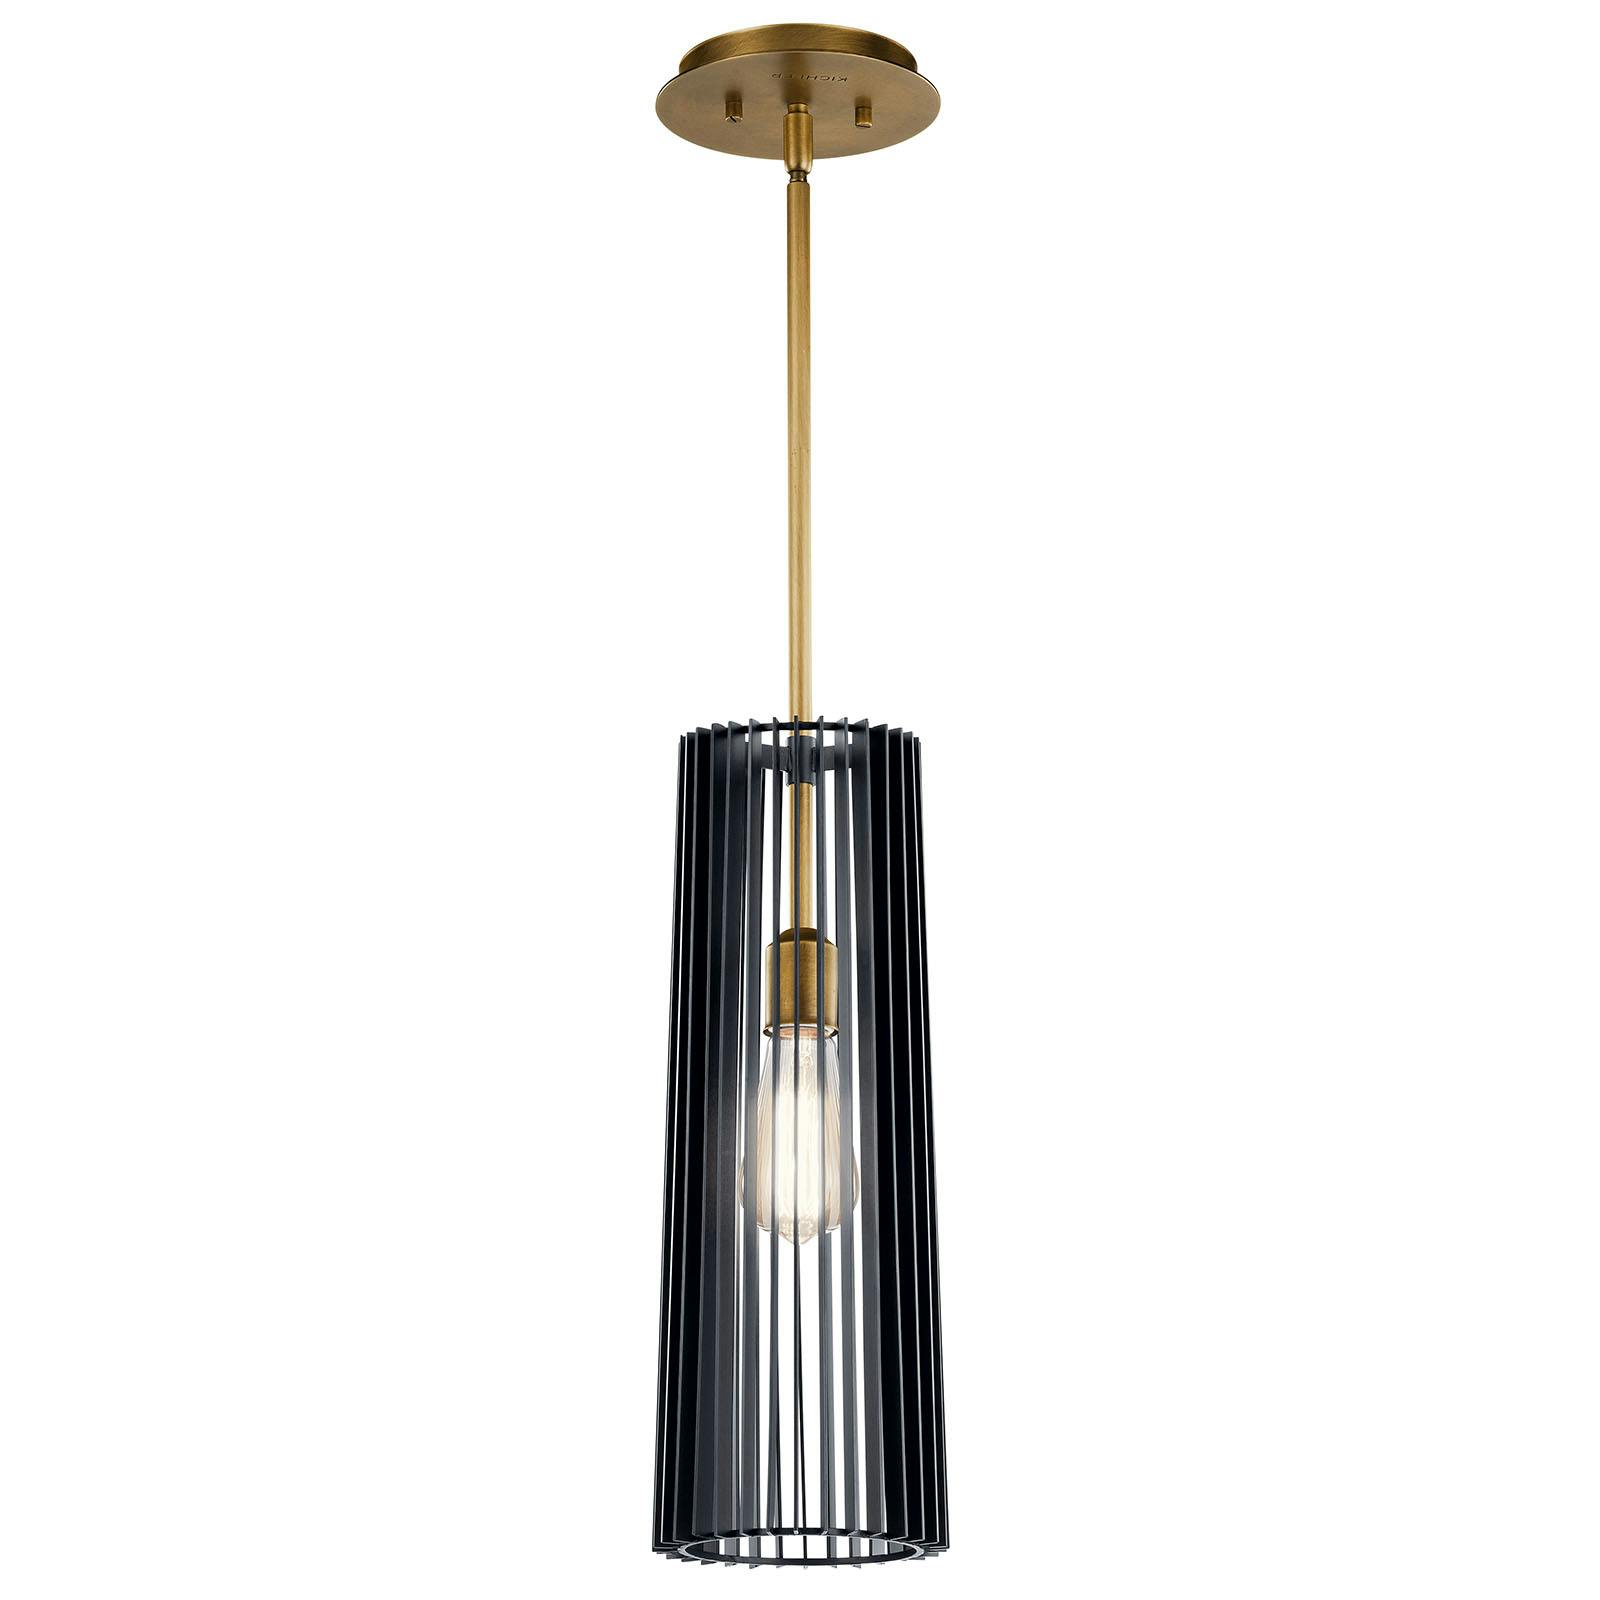 Linara 1 Light Pendant in Black on a white background